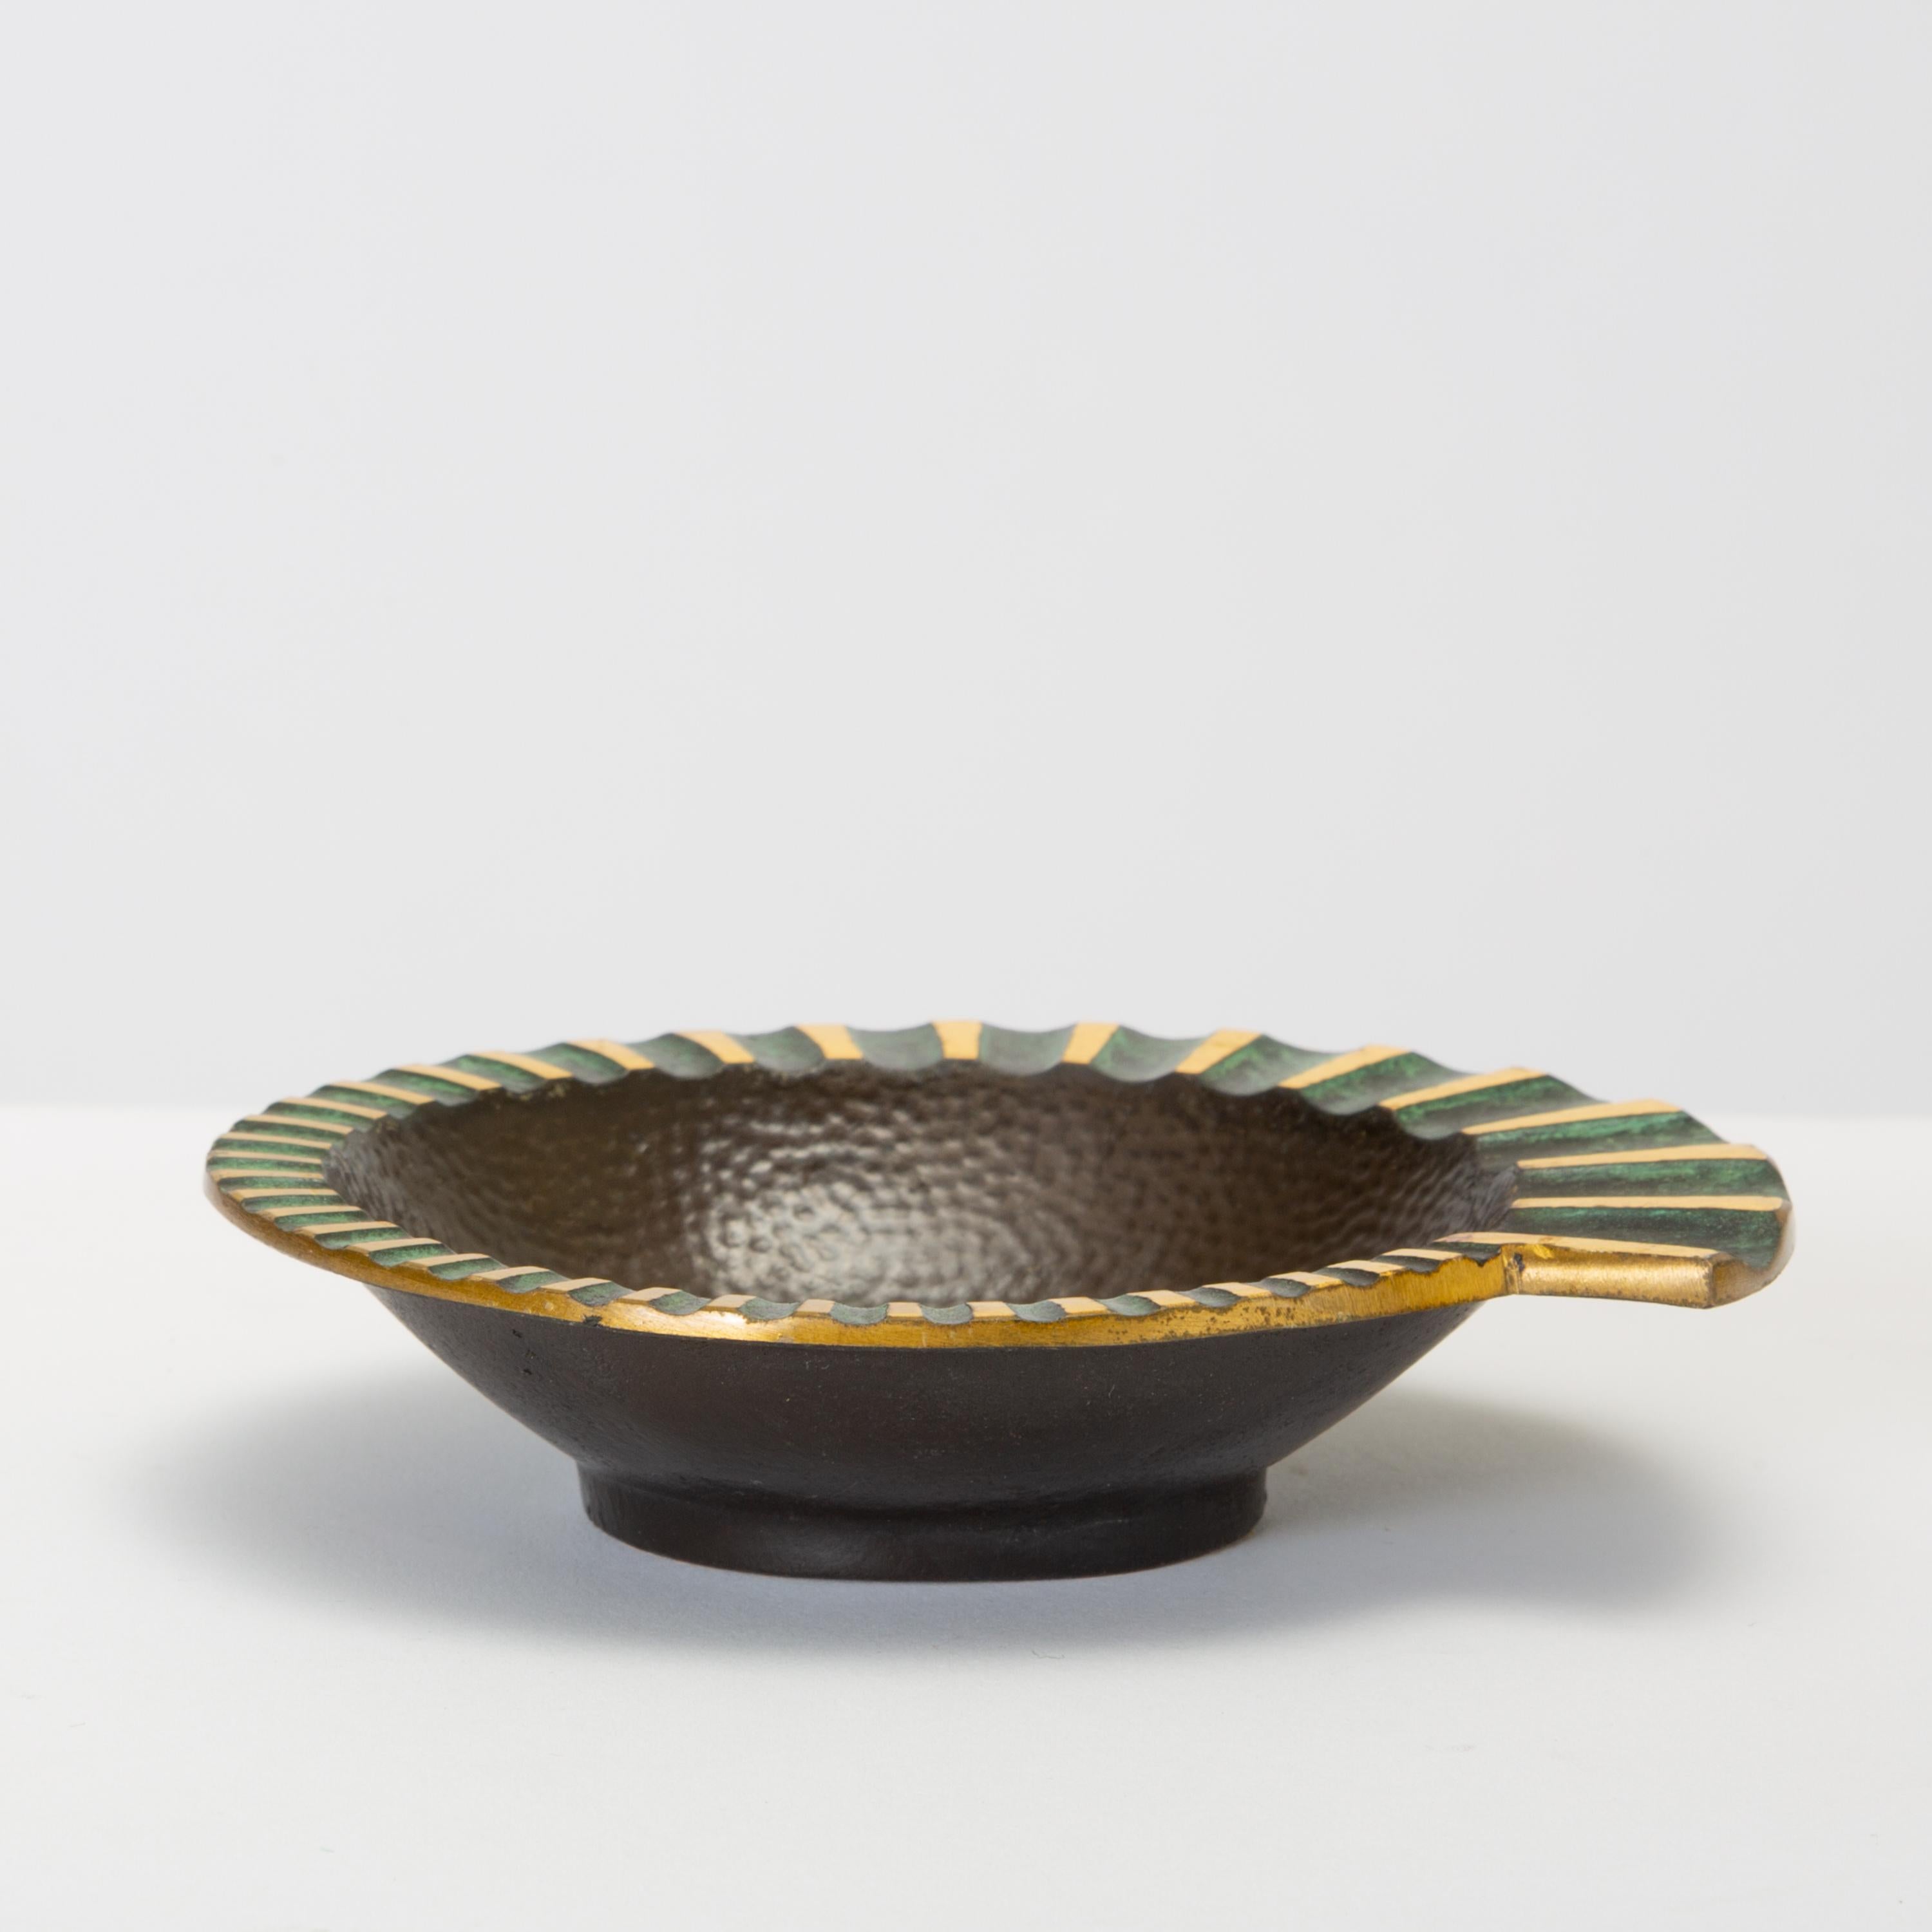 A heavy, cast bronze ashtray in a nautilus shape has a fluted, flat edge that widens as it spirals around the well, which has a hammered texture. The concave portions of the fluting are finished with a verdigris patina that typifies Israeli